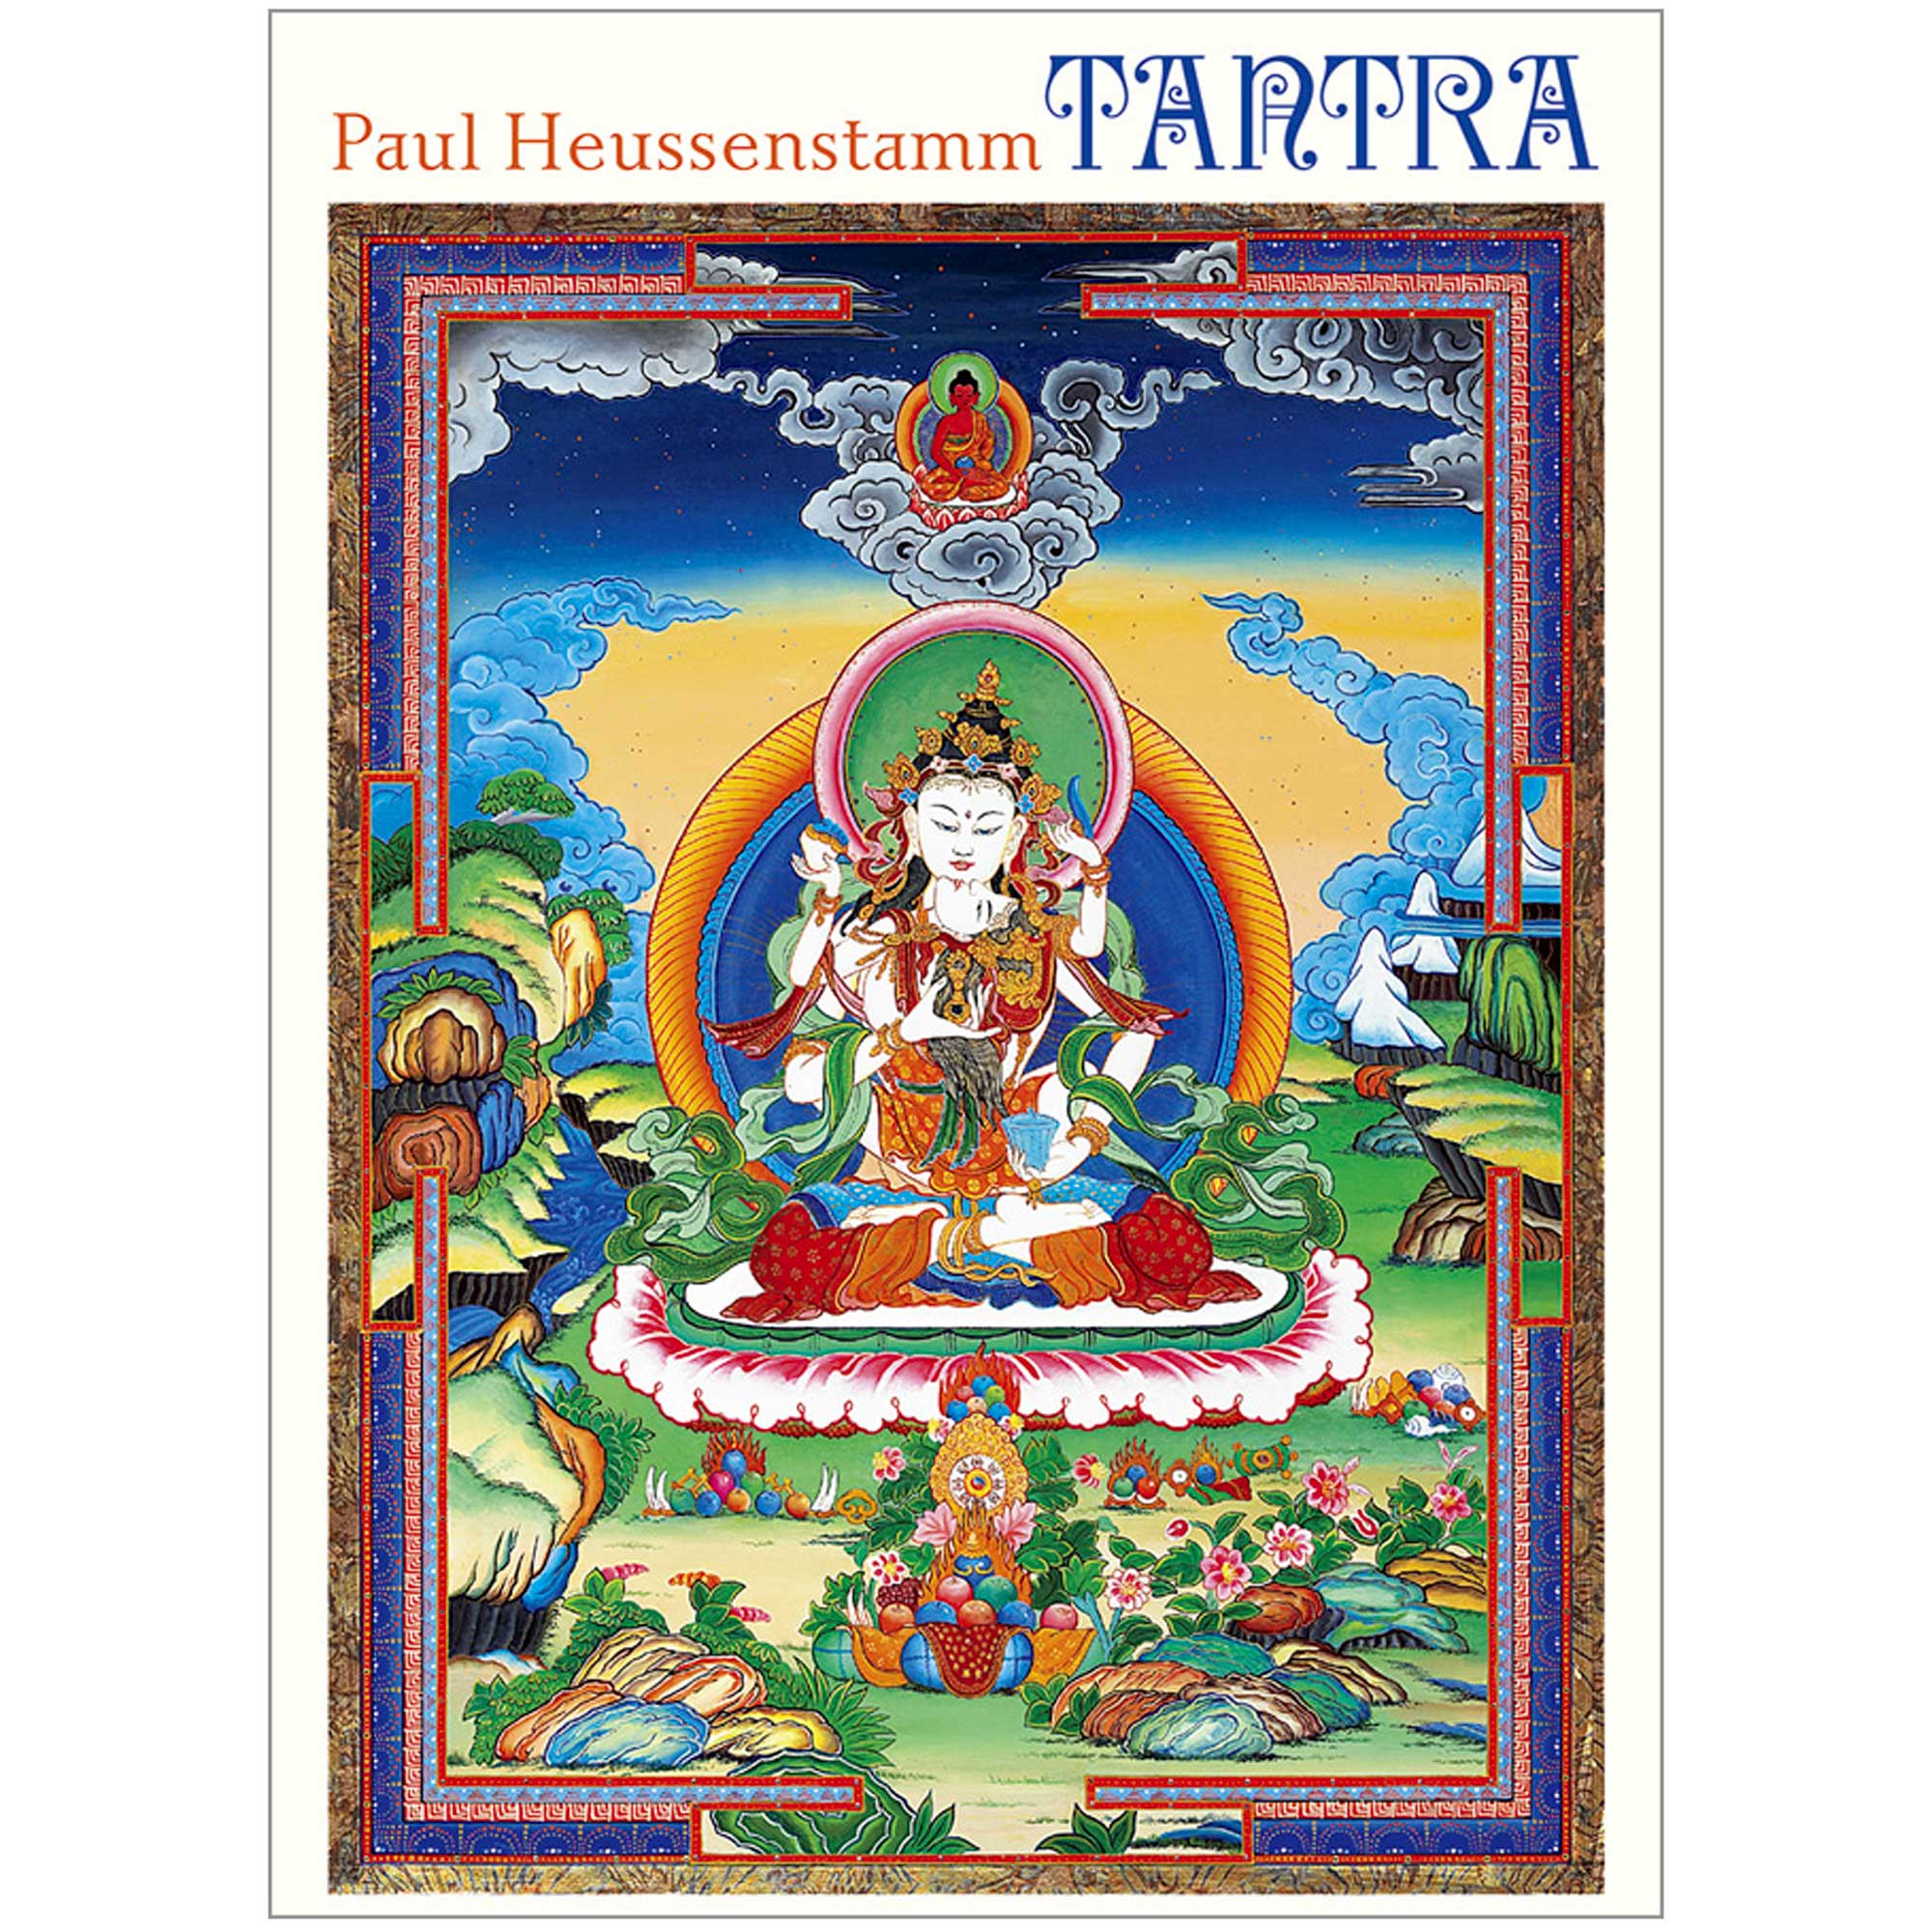 Tantra Boxed Notecard Assortment by Paul Heussenstamm